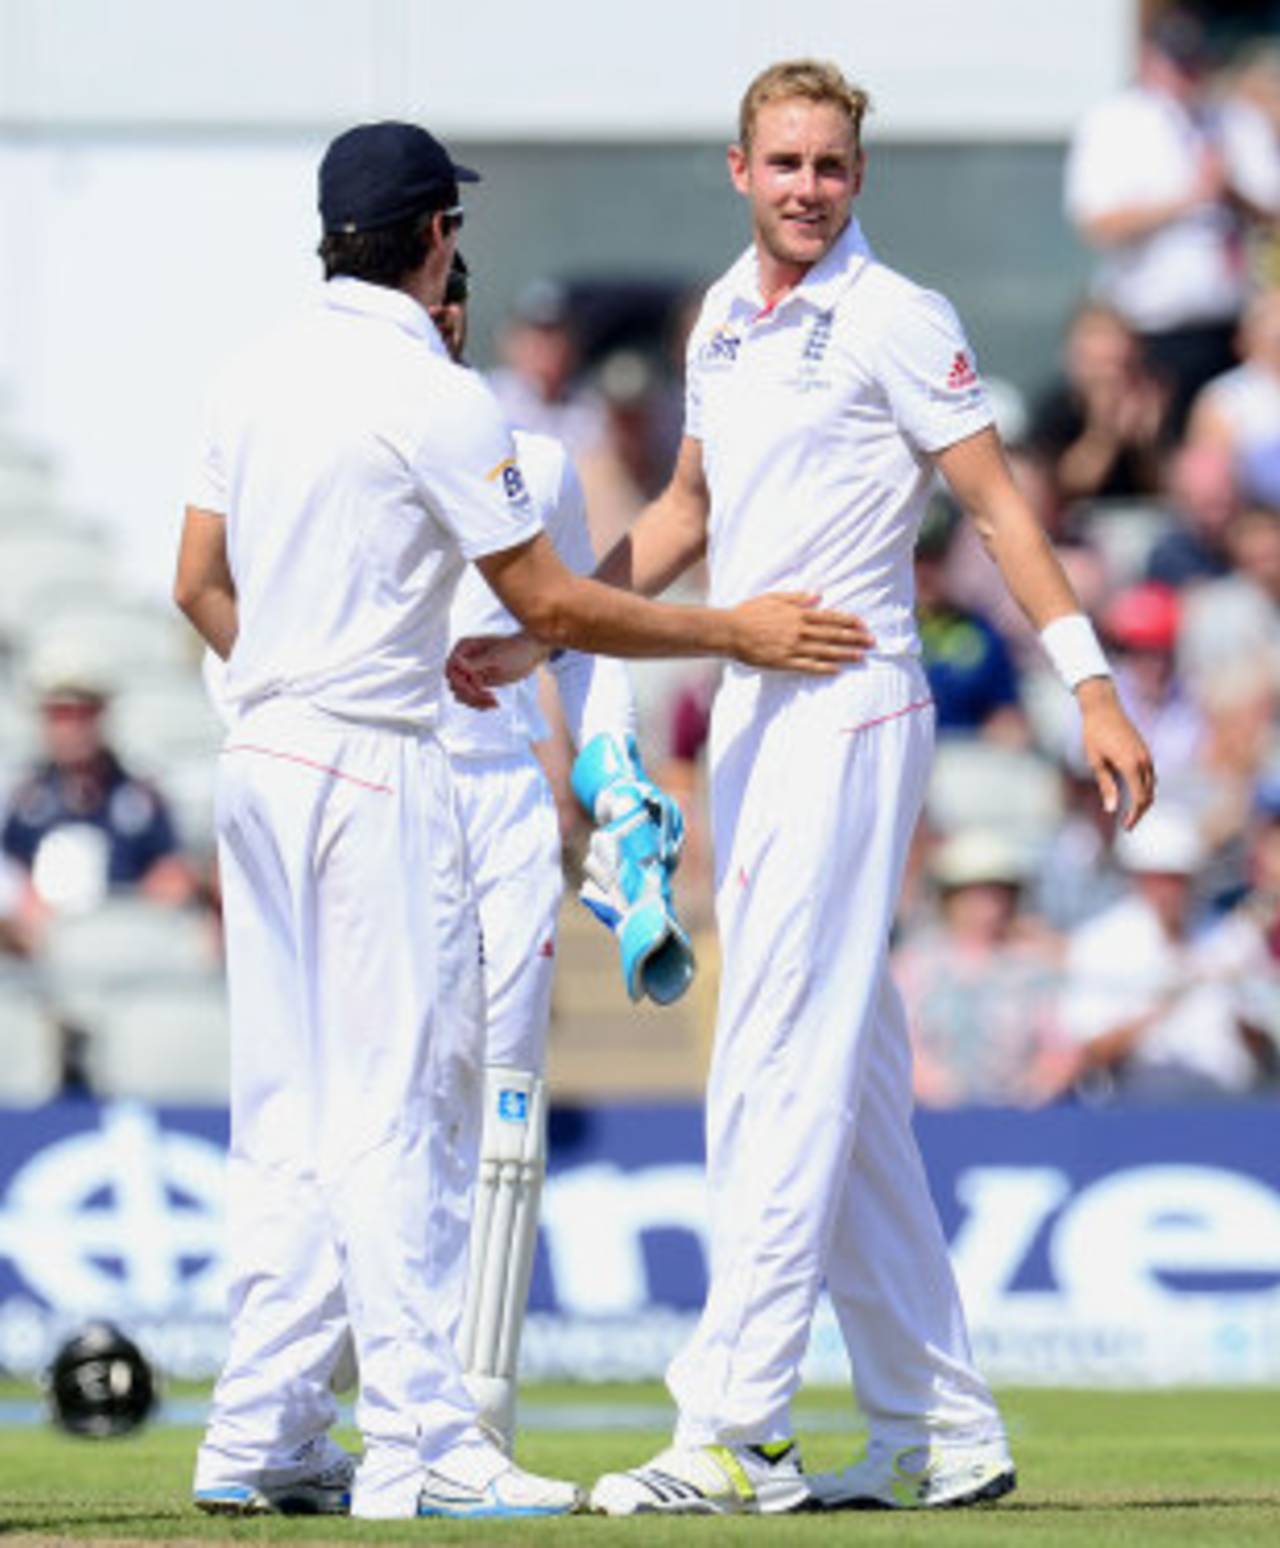 Stuart Broad finally picked up his 200th Test wicket when he removed Michael Clarke, England v Australia, 3rd Investec Test, Old Trafford, 2nd day, August 2, 2013